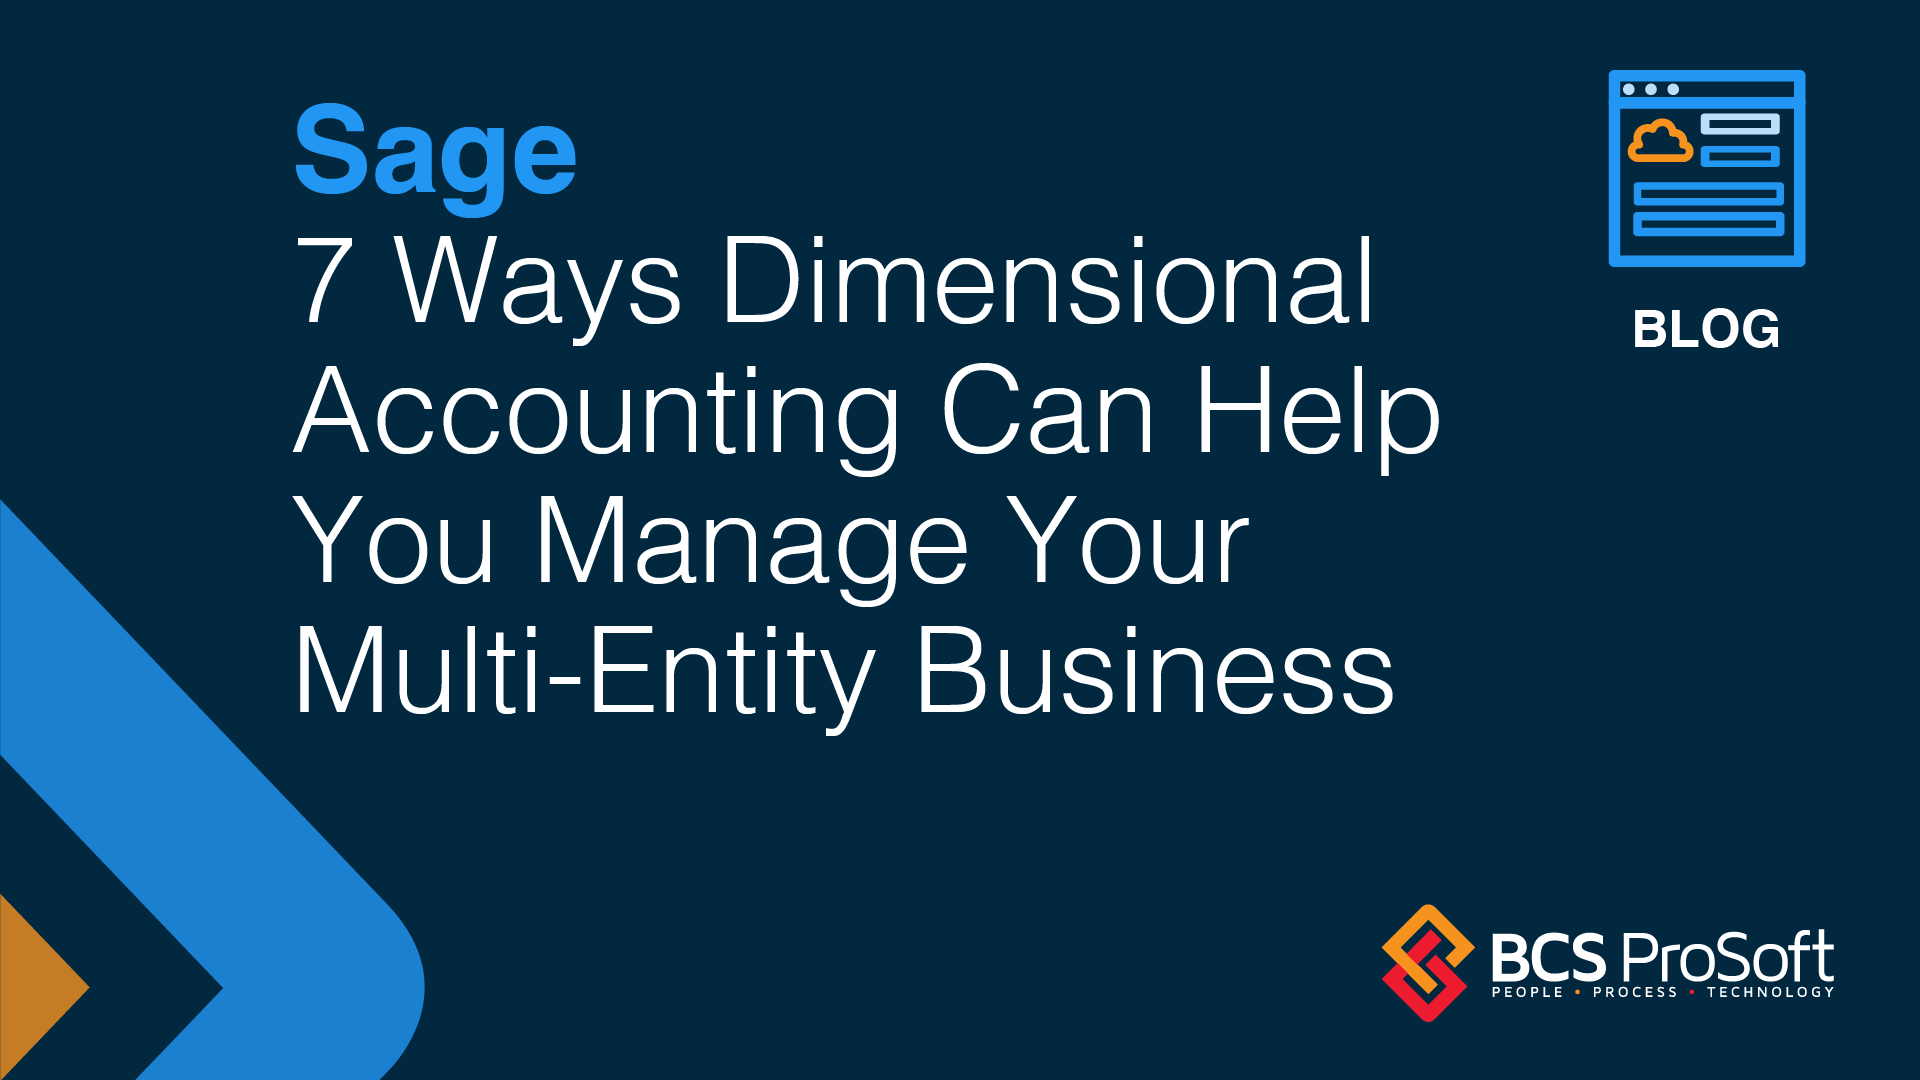 Dimensional Accounting